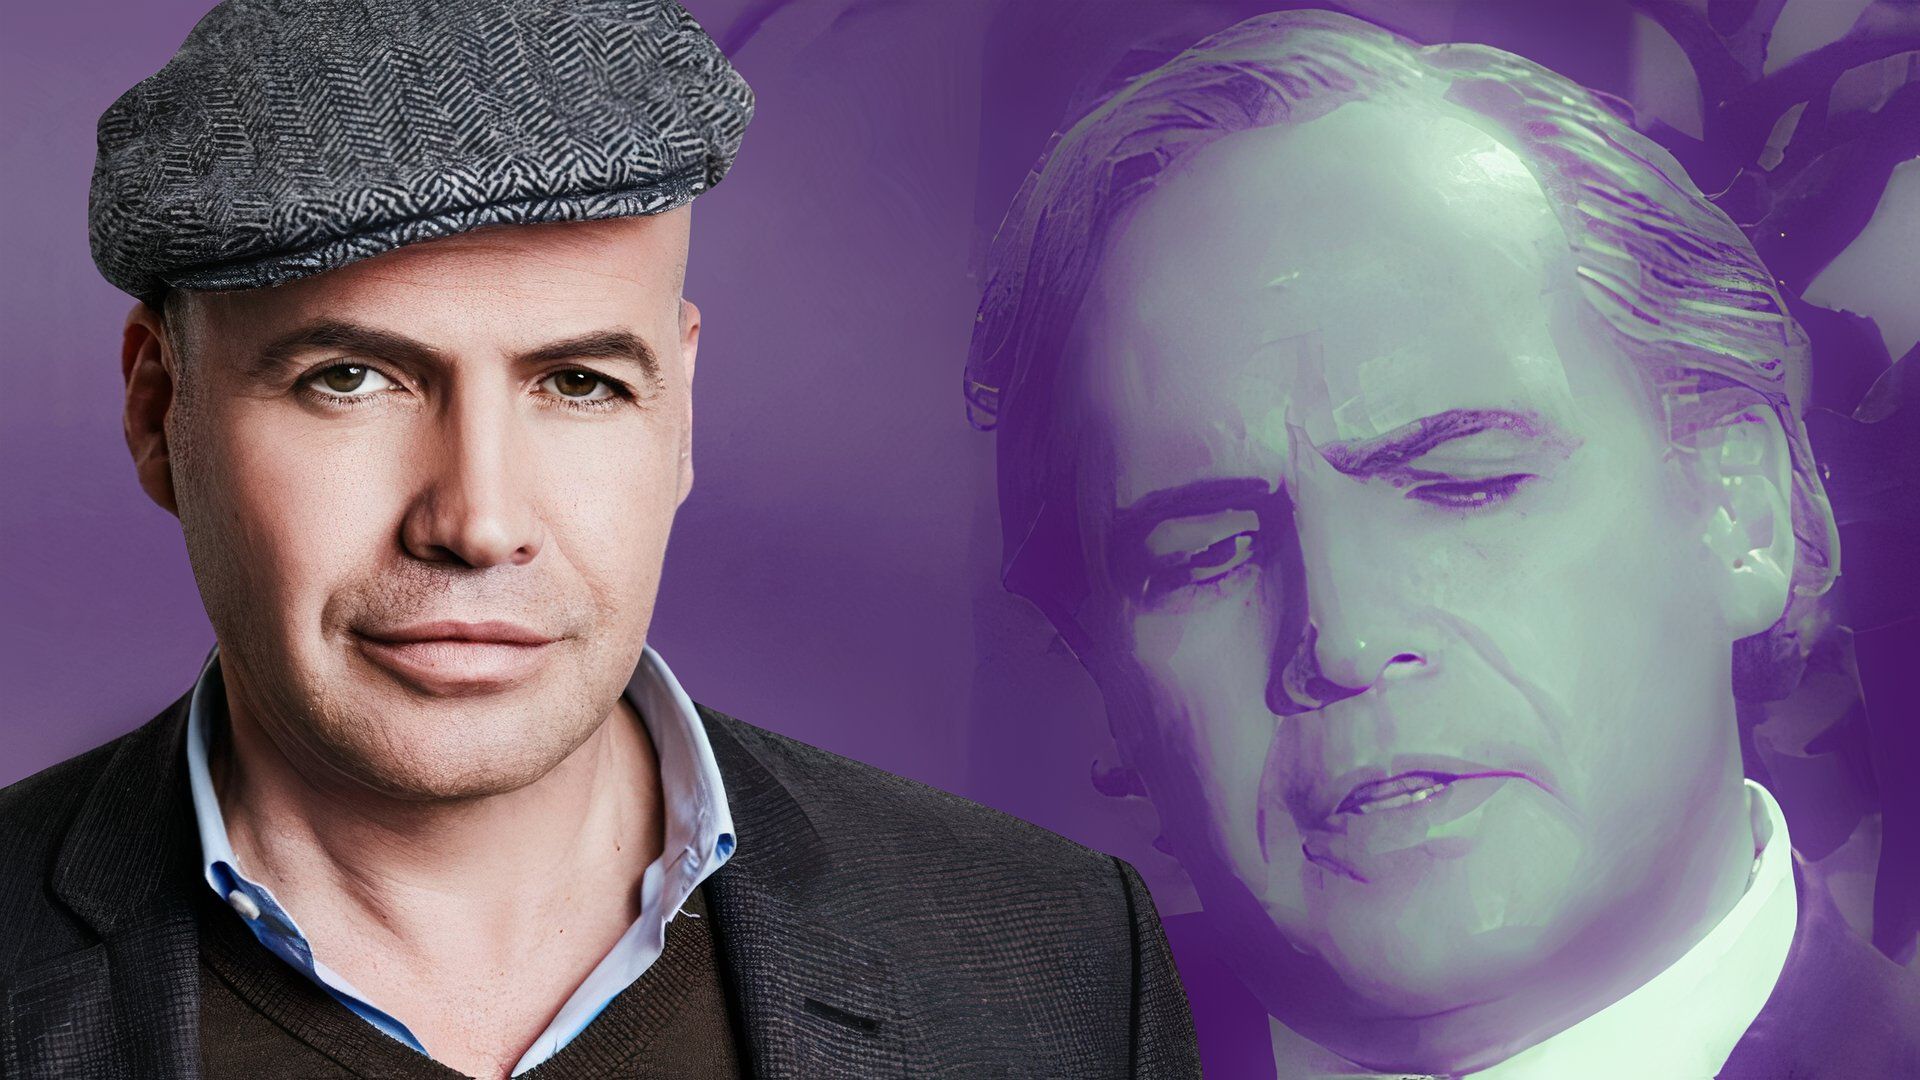 Billy Zane Stuns as Marlon Brando in New Images From Upcoming Biopic